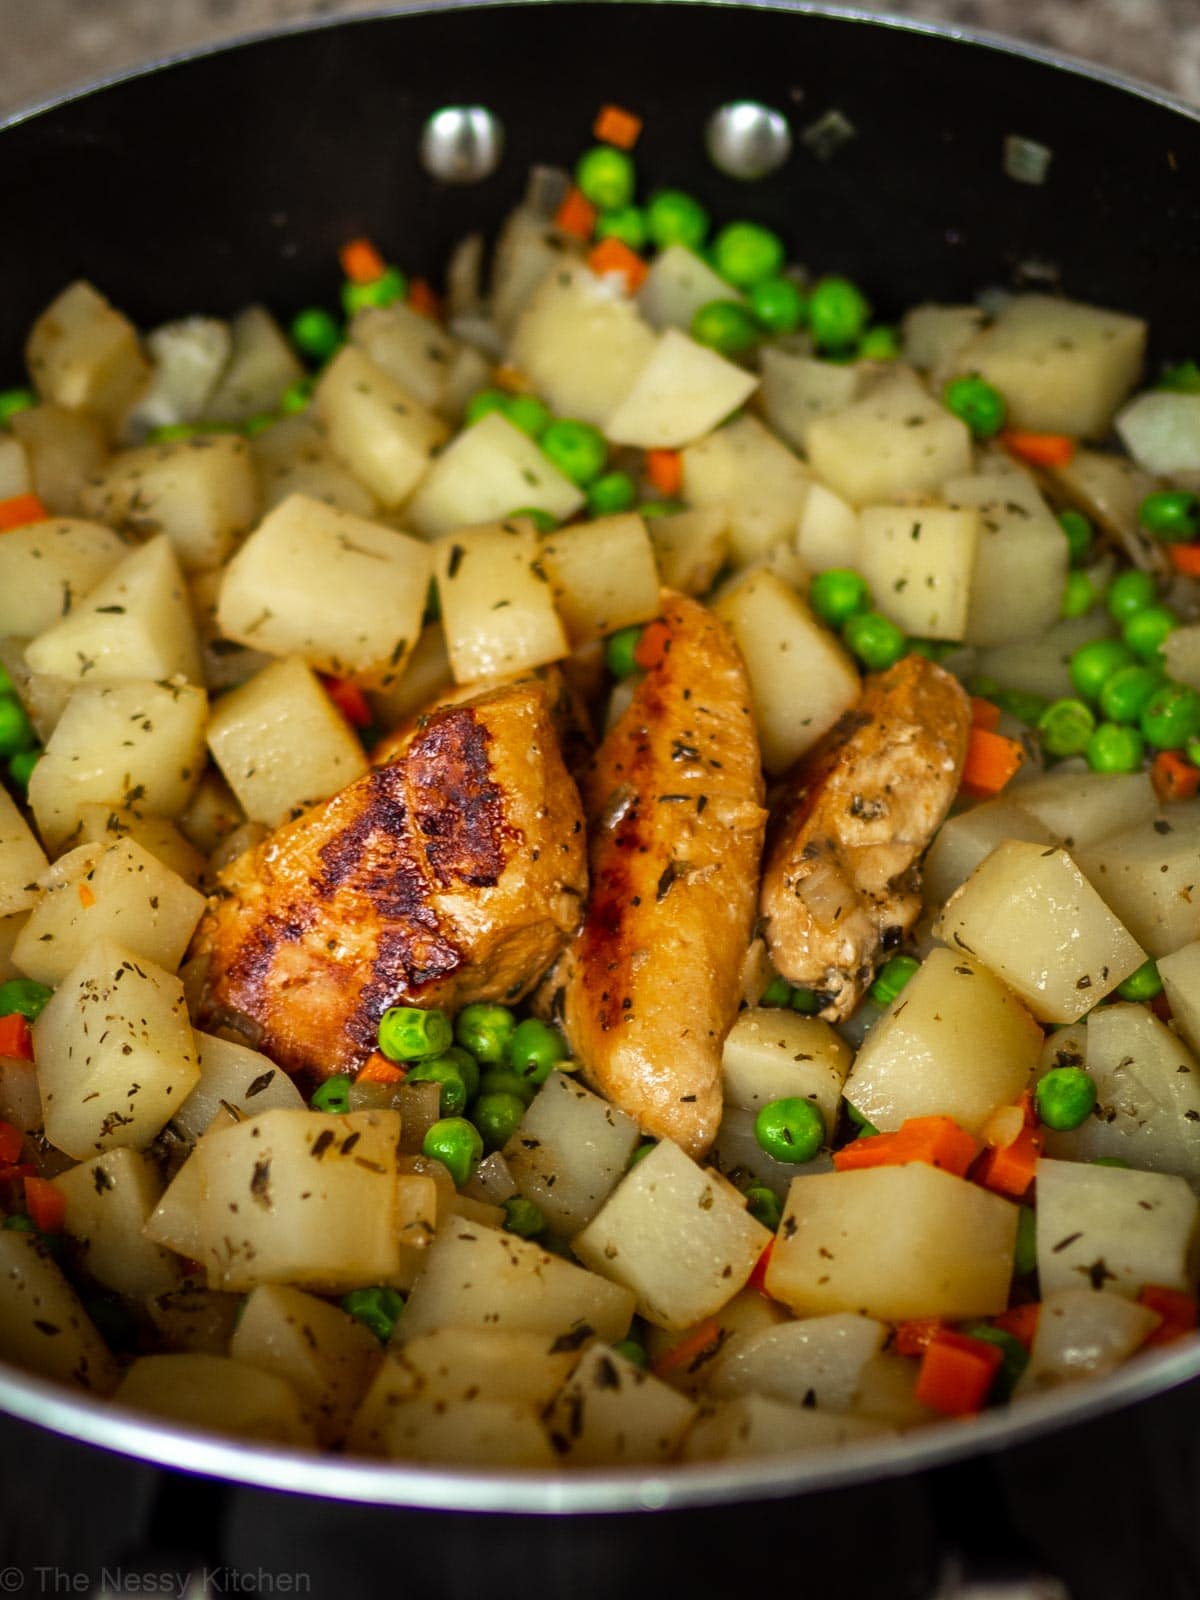 Close up shot showing nicely browned chicken in the skillet with potatoes and vegetables.